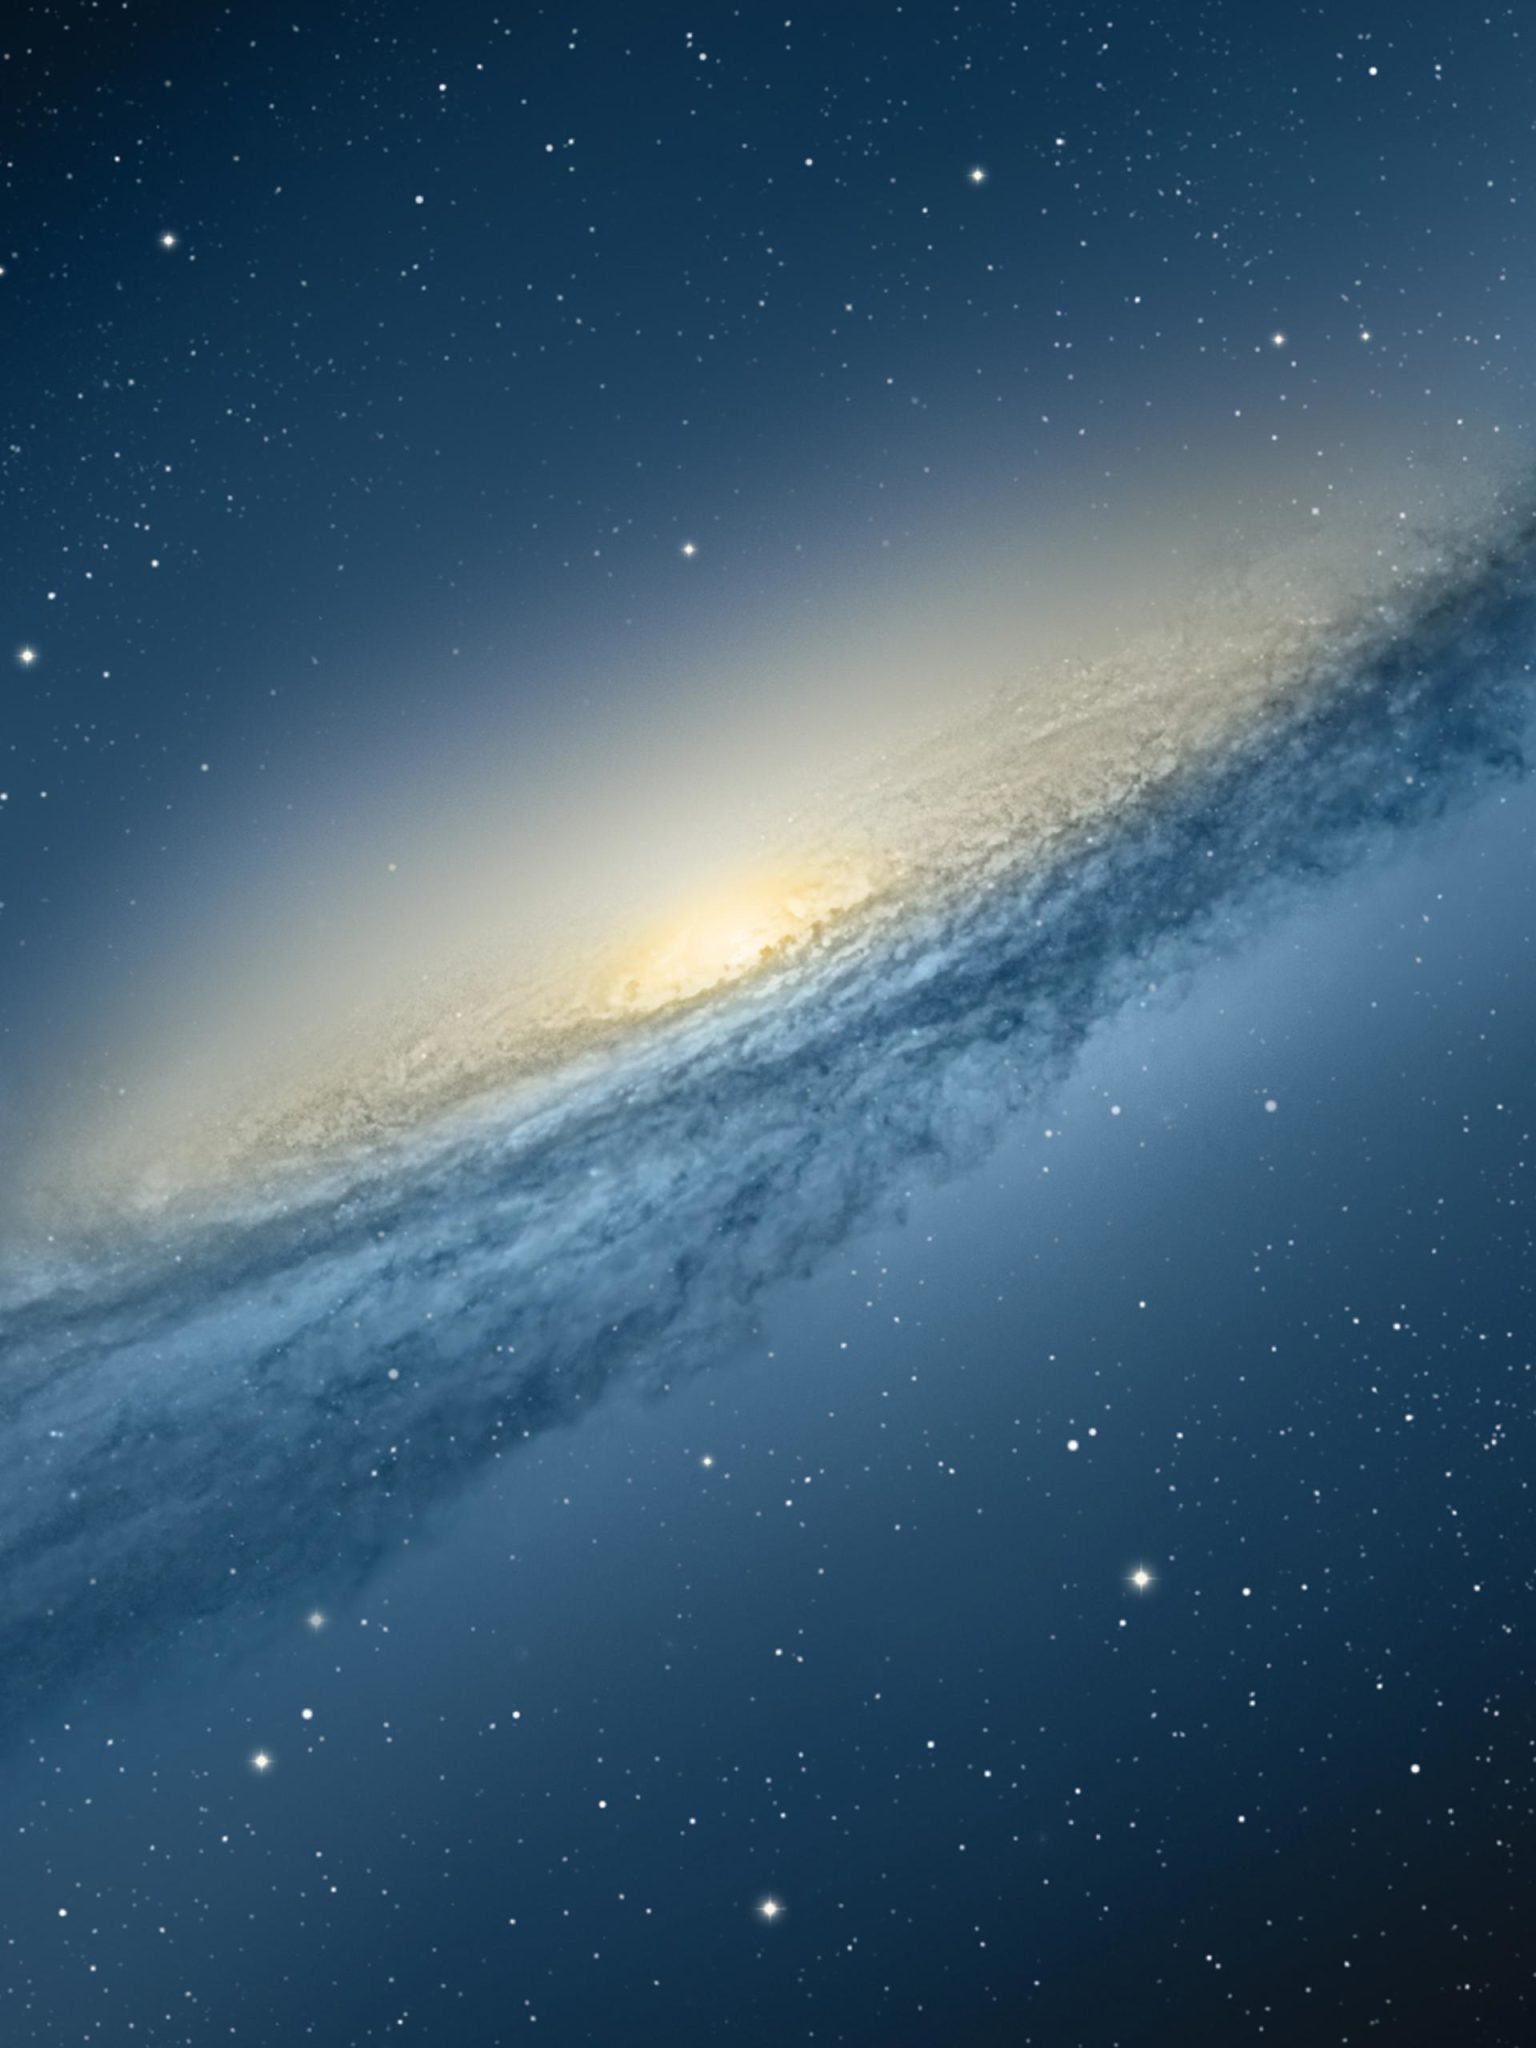 Ipad Cute Simple Galaxy Backgrounds – HD Wallpapers Backgrounds Images